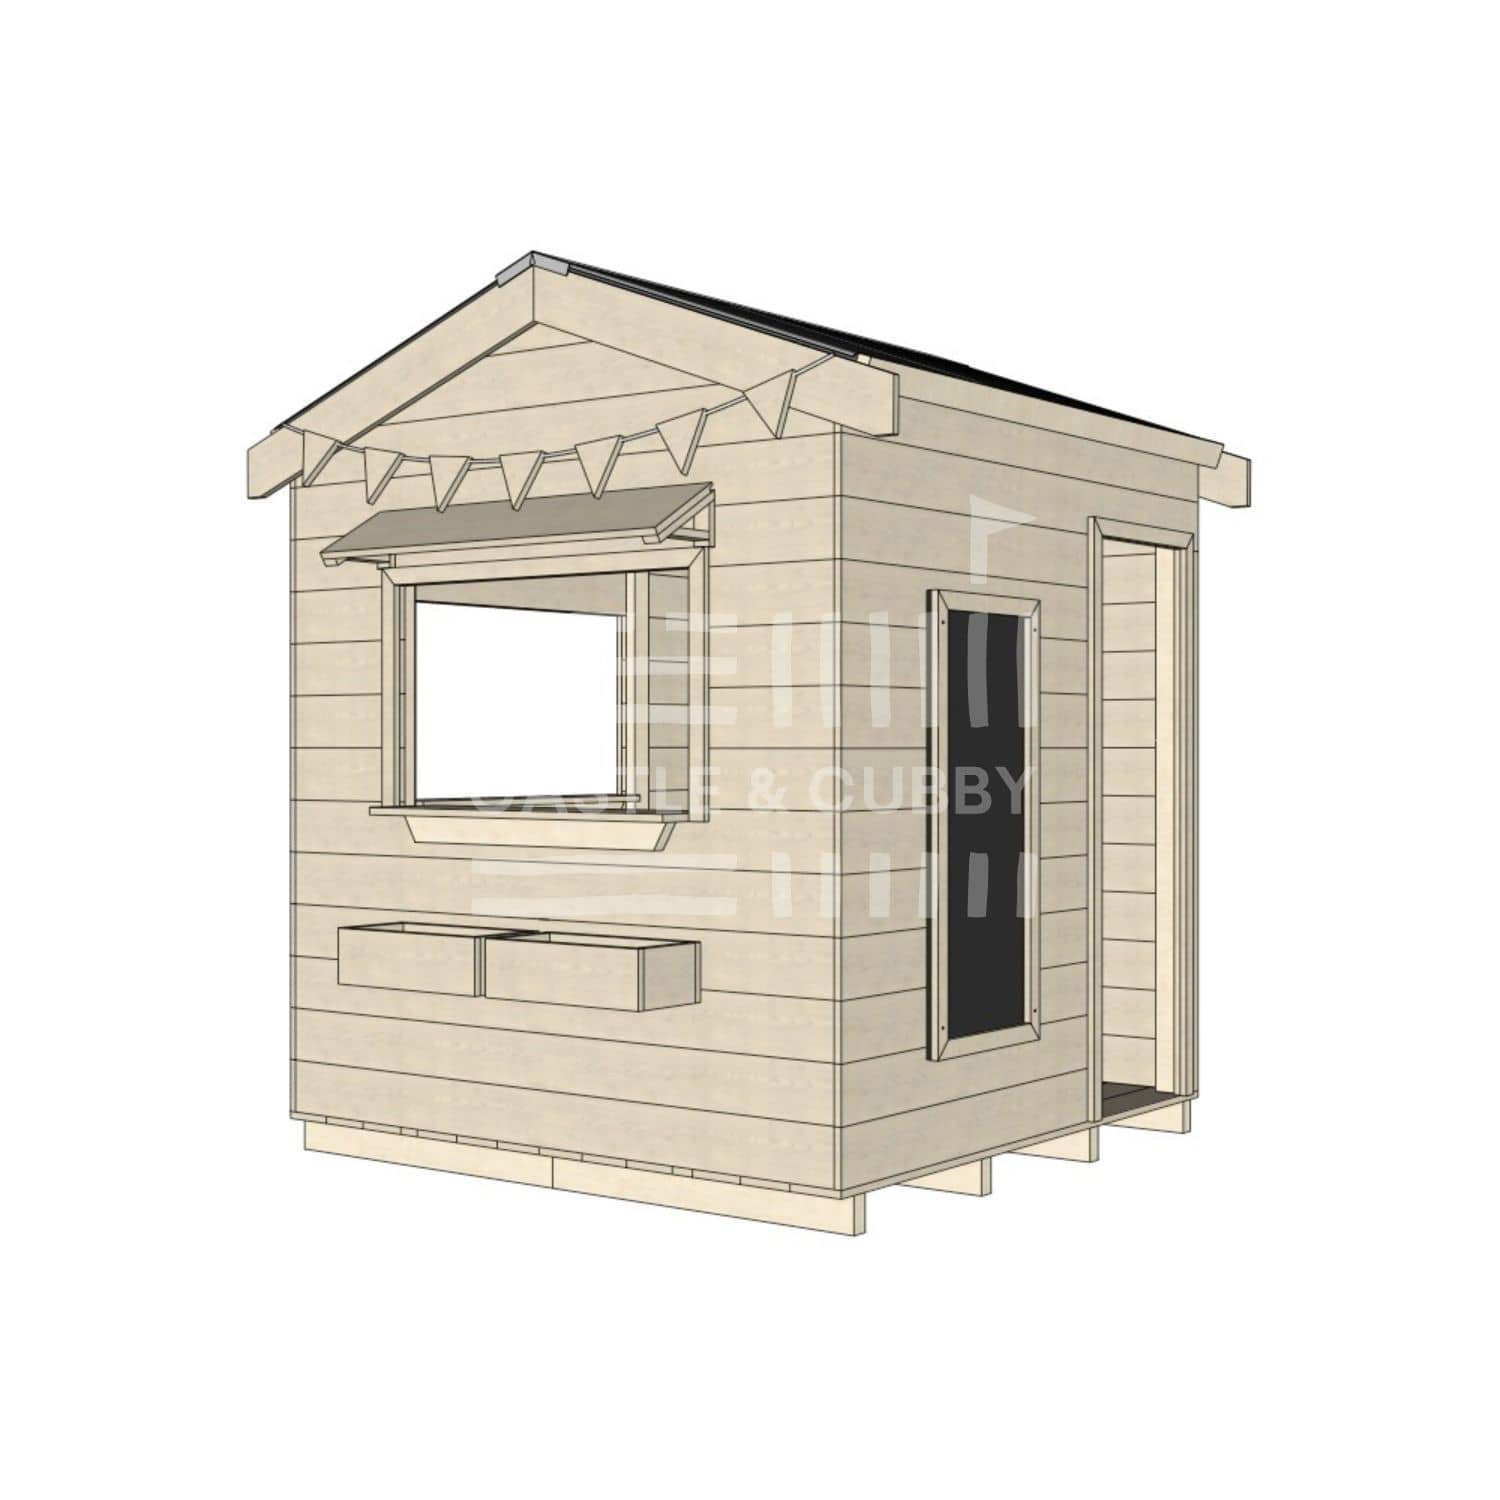 Pitched roof extra height raw wooden cubby house commercial education midi square accessories